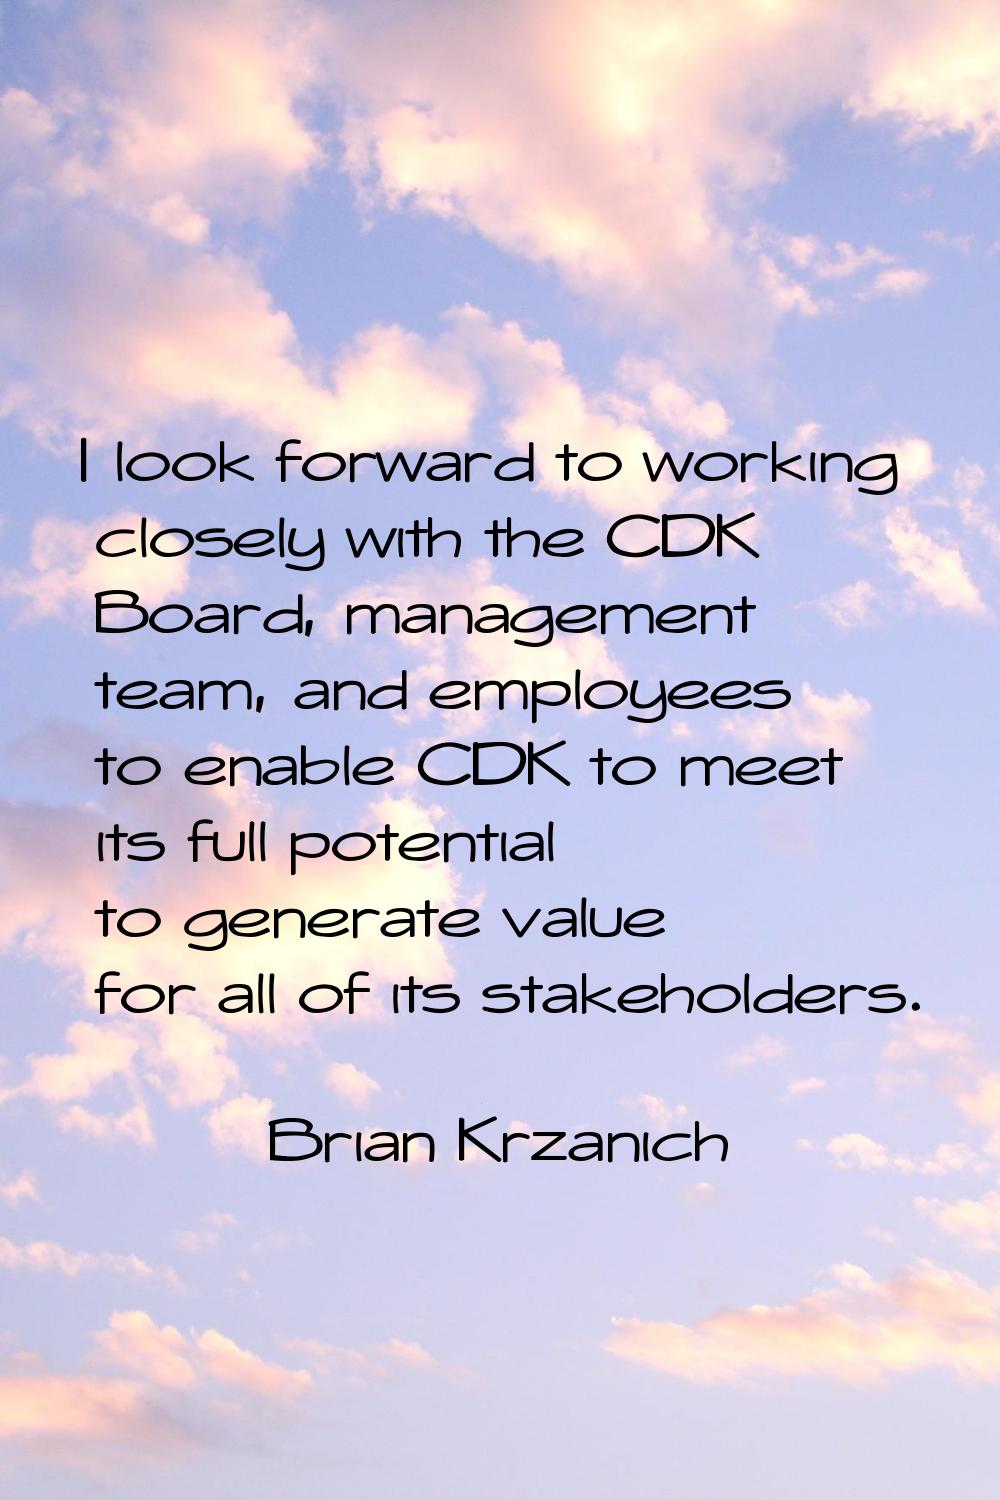 I look forward to working closely with the CDK Board, management team, and employees to enable CDK 